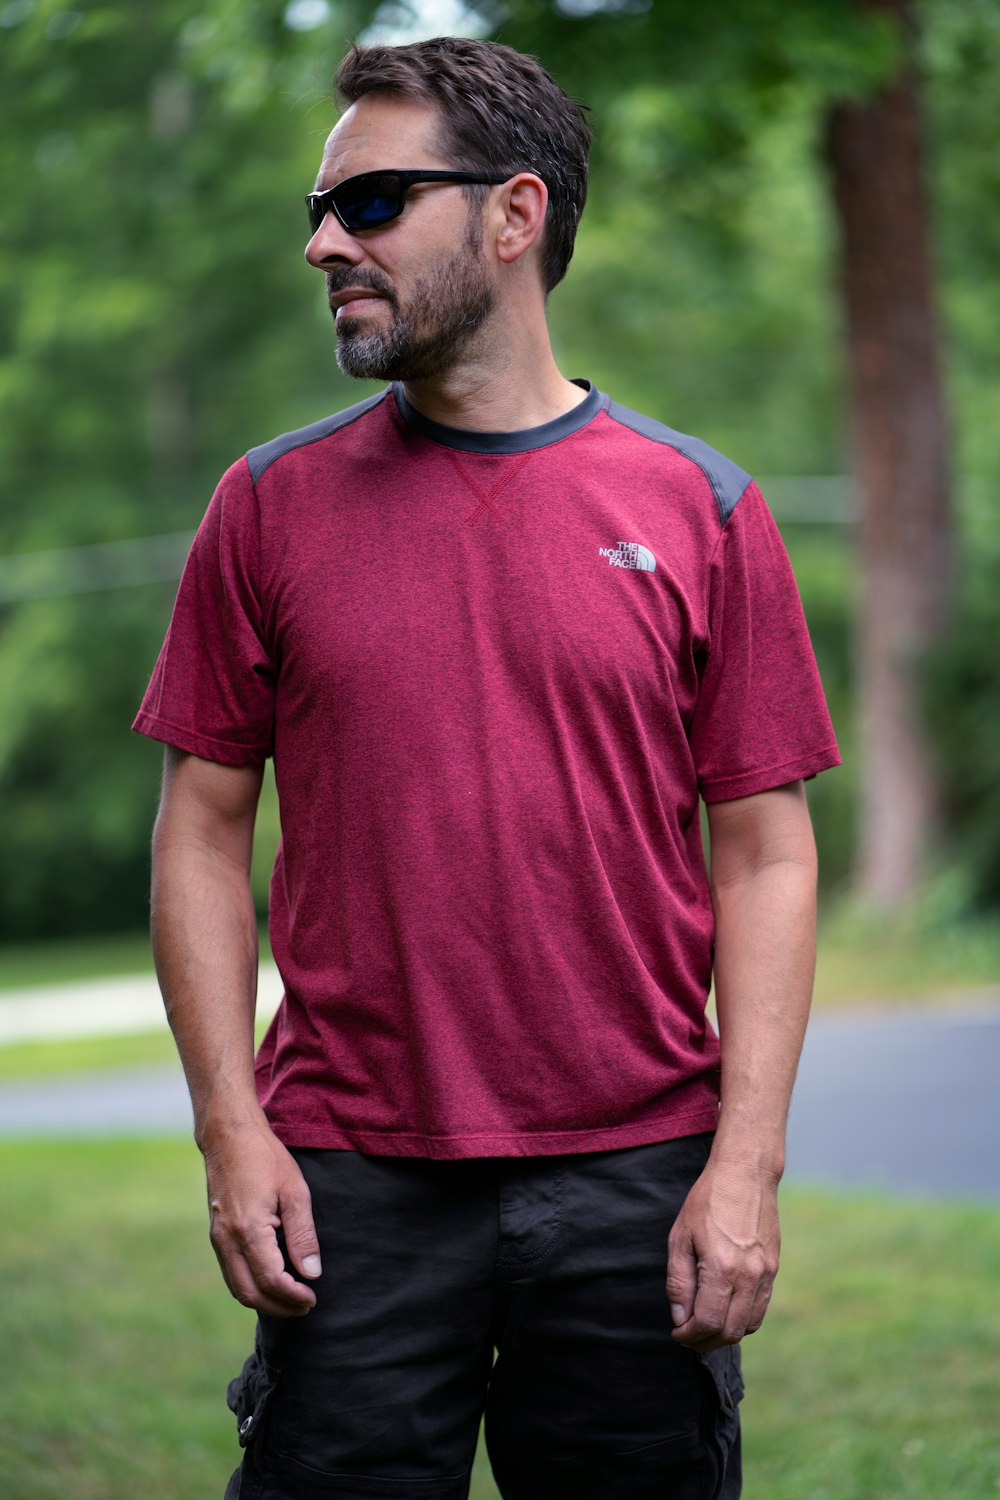 man in red nike crew neck t-shirt standing on green grass field during daytime